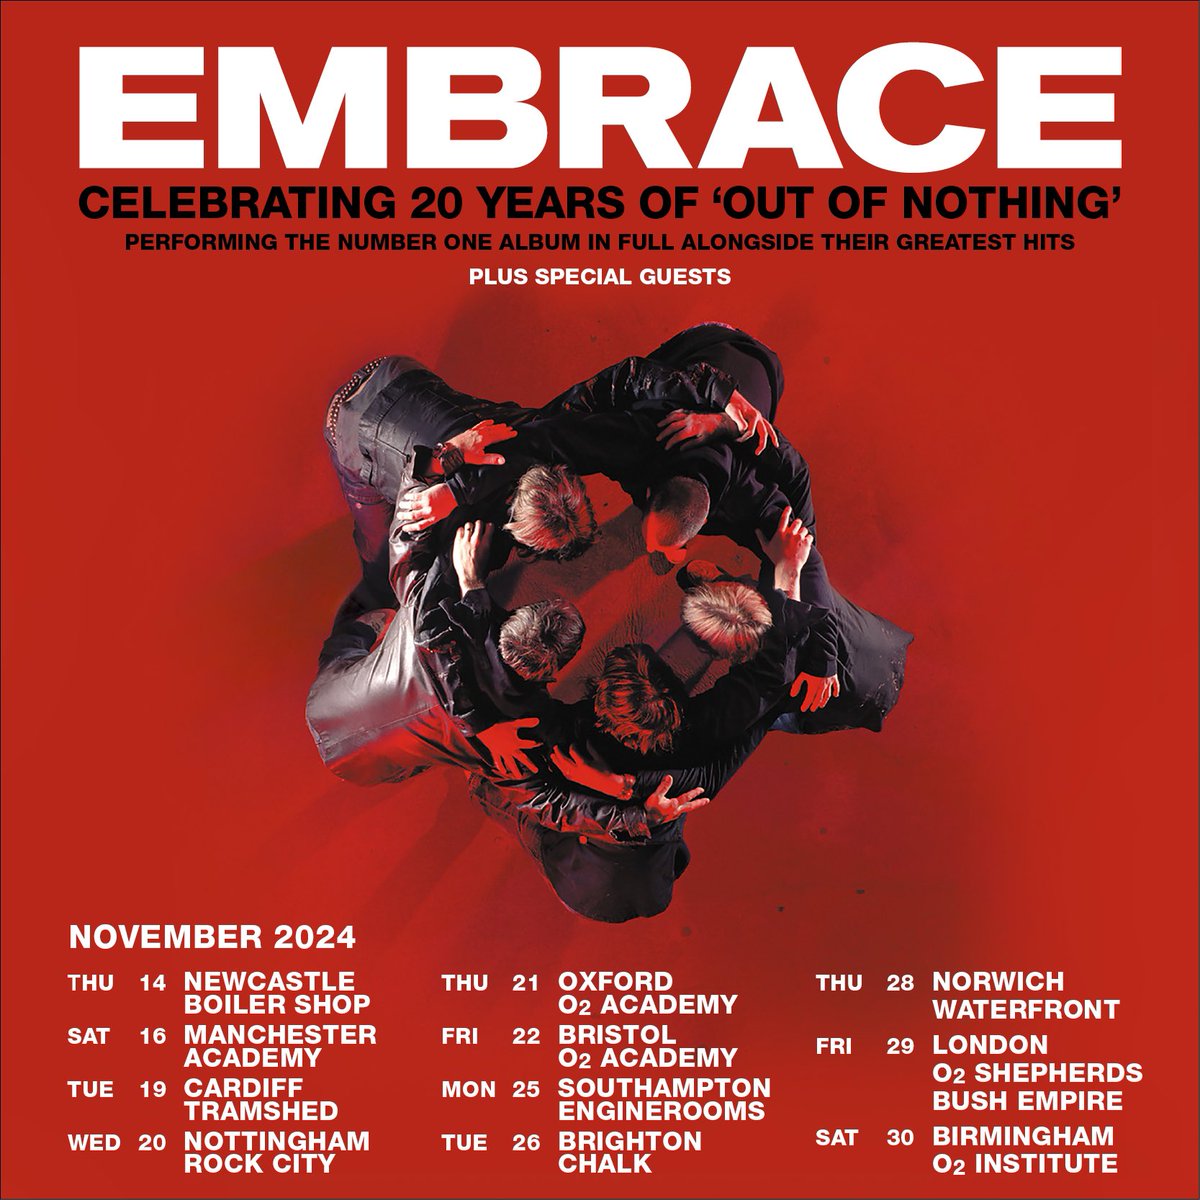 *NEW SHOW* Following a packed show last year, the legendary @embrace head back our way on Thursday 14 November to celebrate 20 years of the double-platinum, ‘Out Of Nothing’. Set your alarms for 9am on Friday 26 April - this one will sell fast: bit.ly/3W4grPB